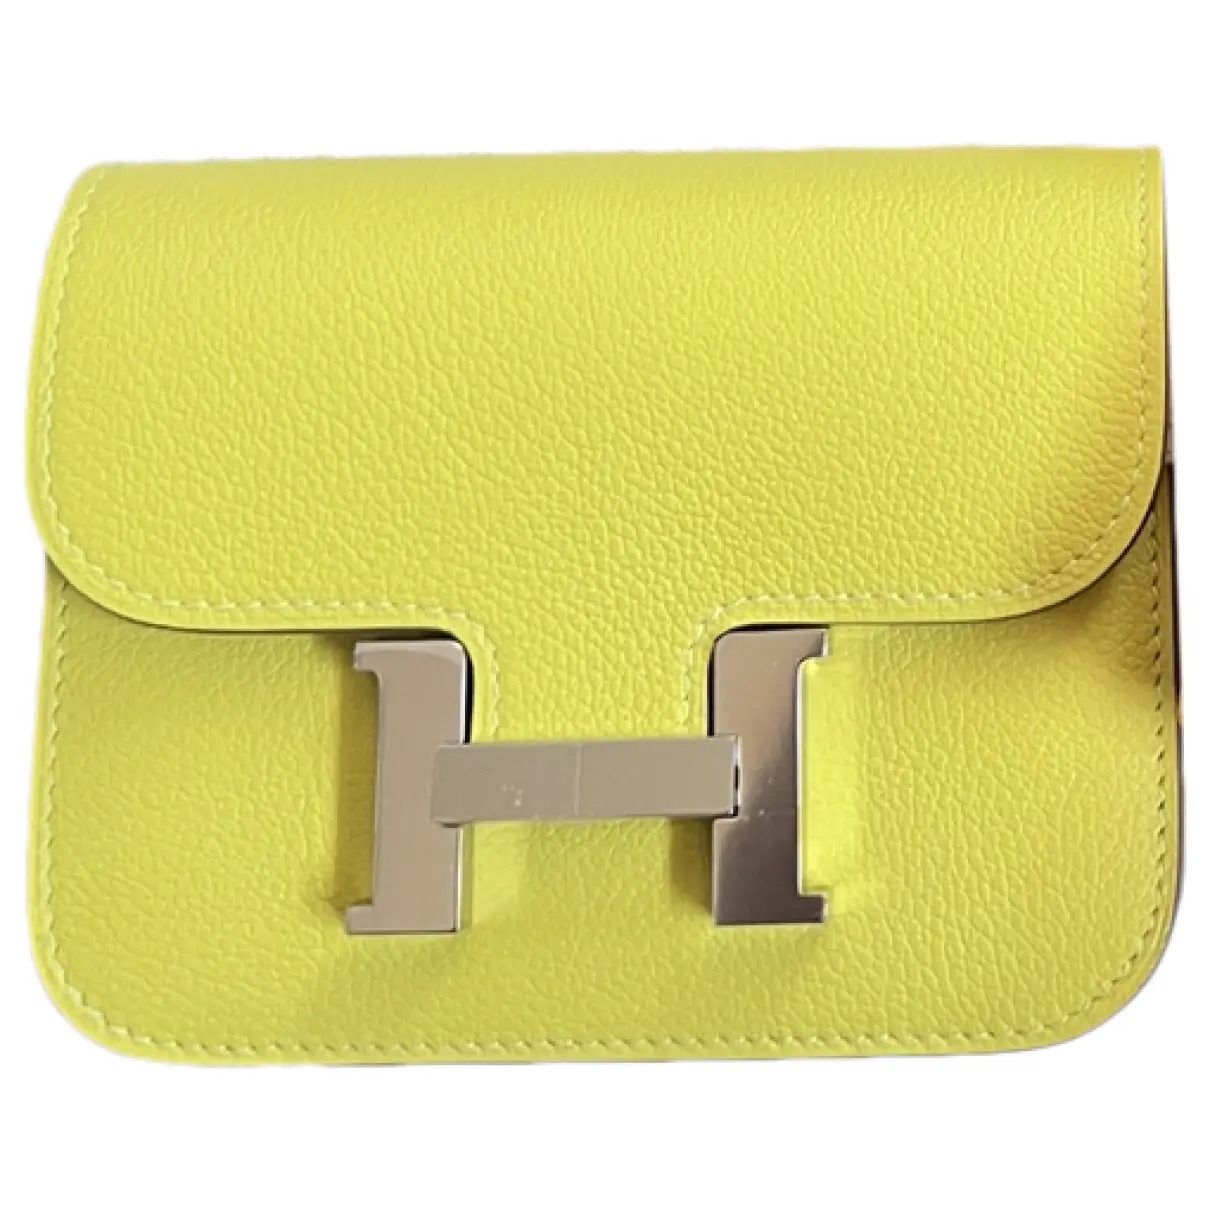 Constance leather clutch bag